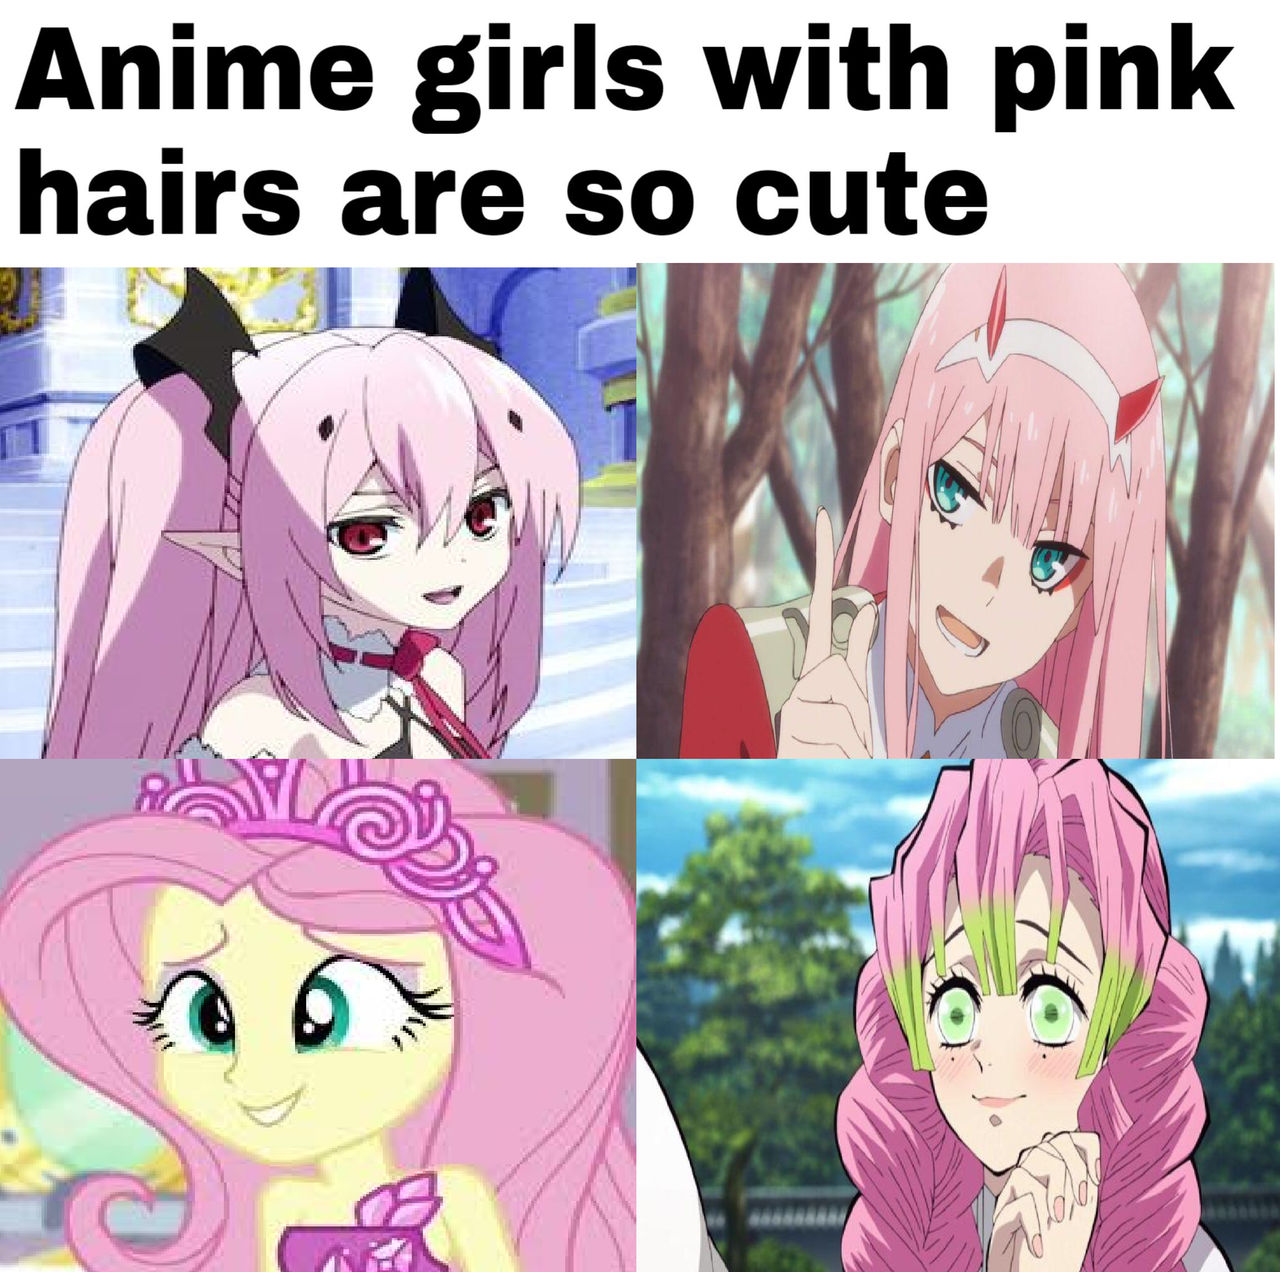 Anime Girls with Pink hair Meme. by brandonale on DeviantArt